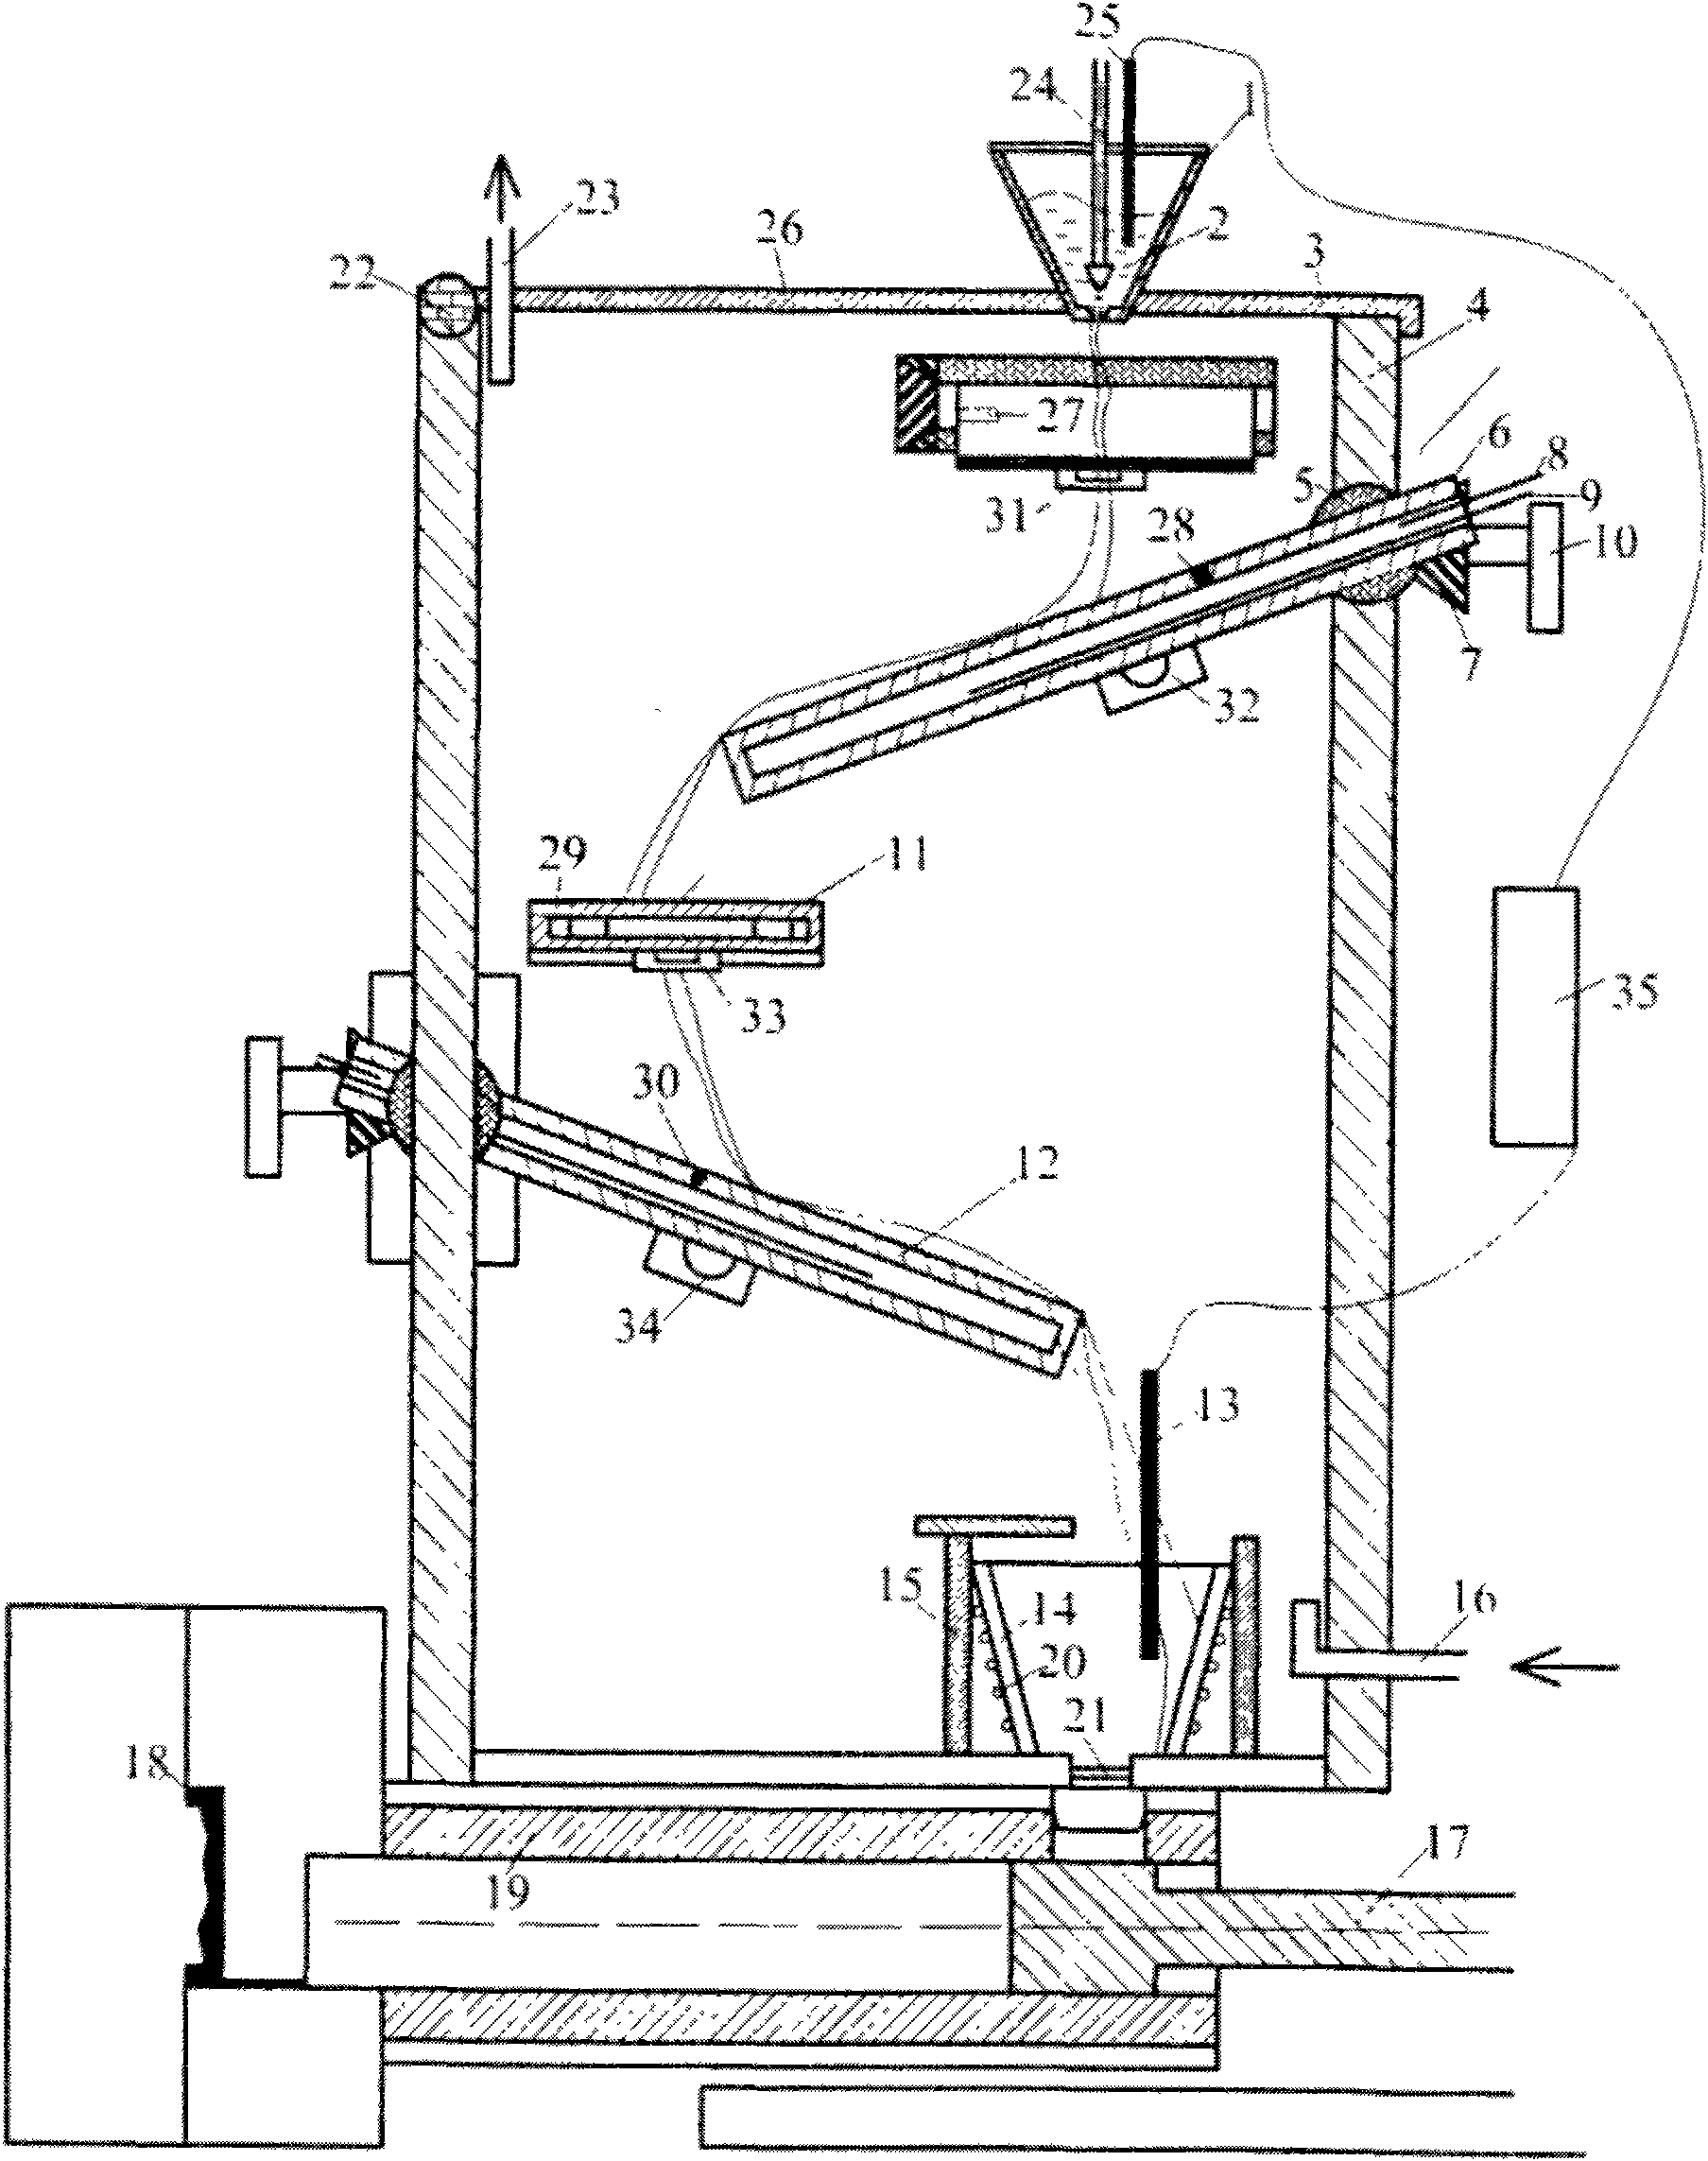 Semi-solid rheological molding device for metal part